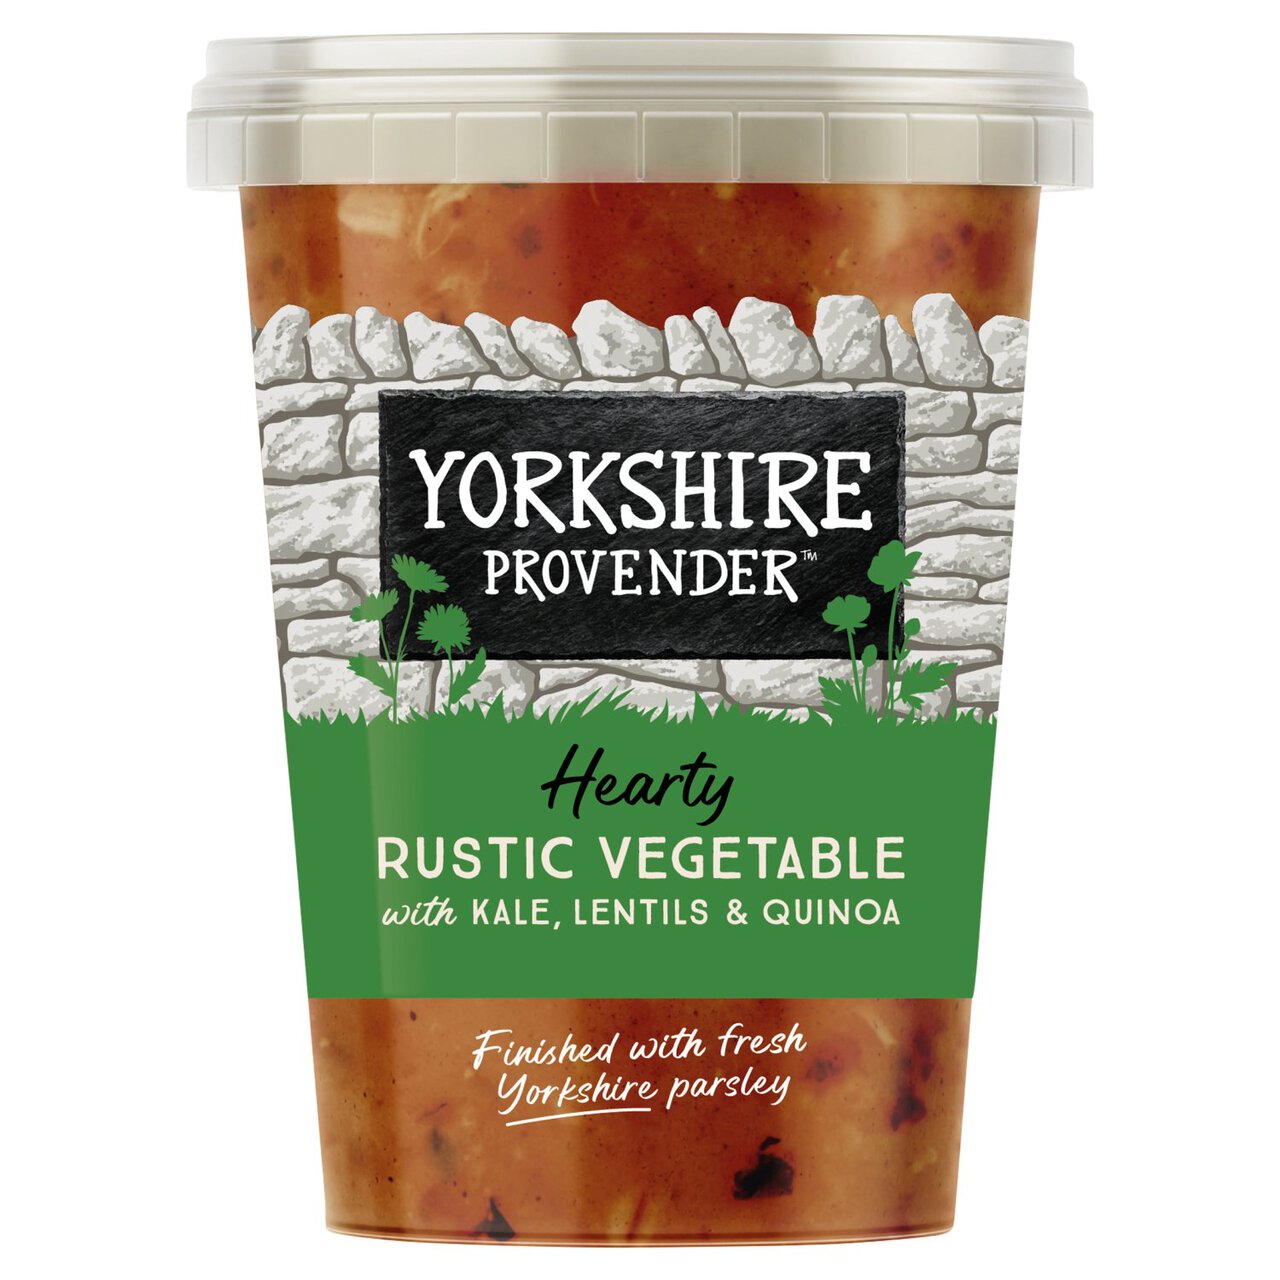 Yorkshire Provender Rustic Vegetable Broth with Lentils, Kale & Quinoa 600g